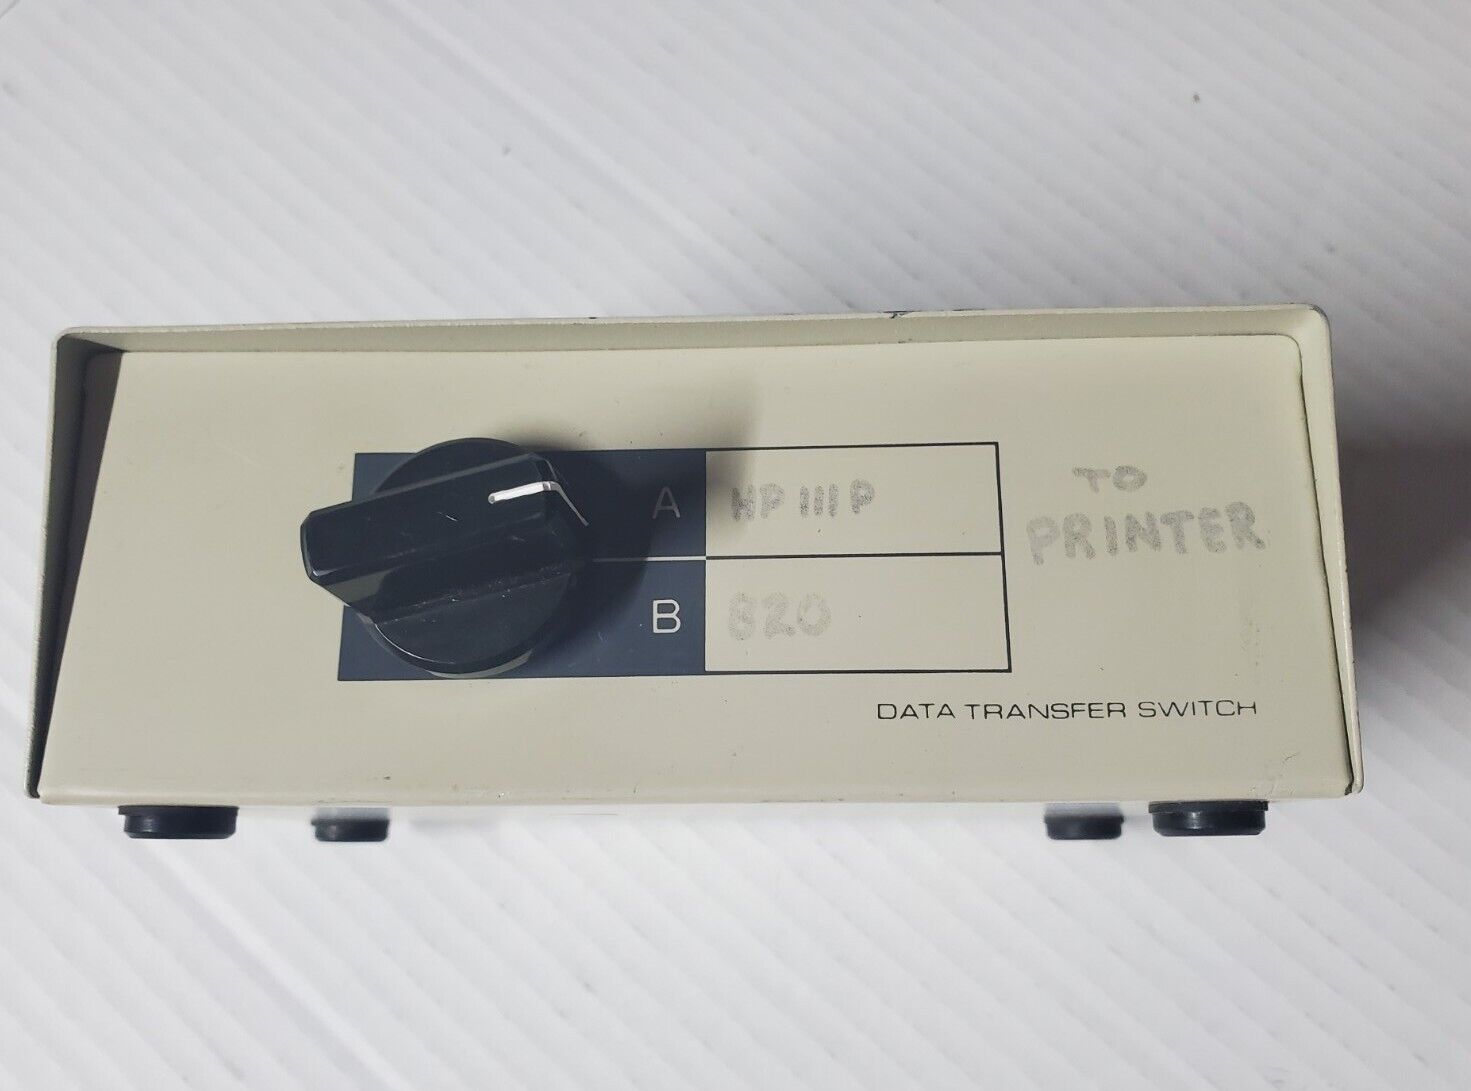 2-Port Data Transfer Switch A/B for Computer PC  